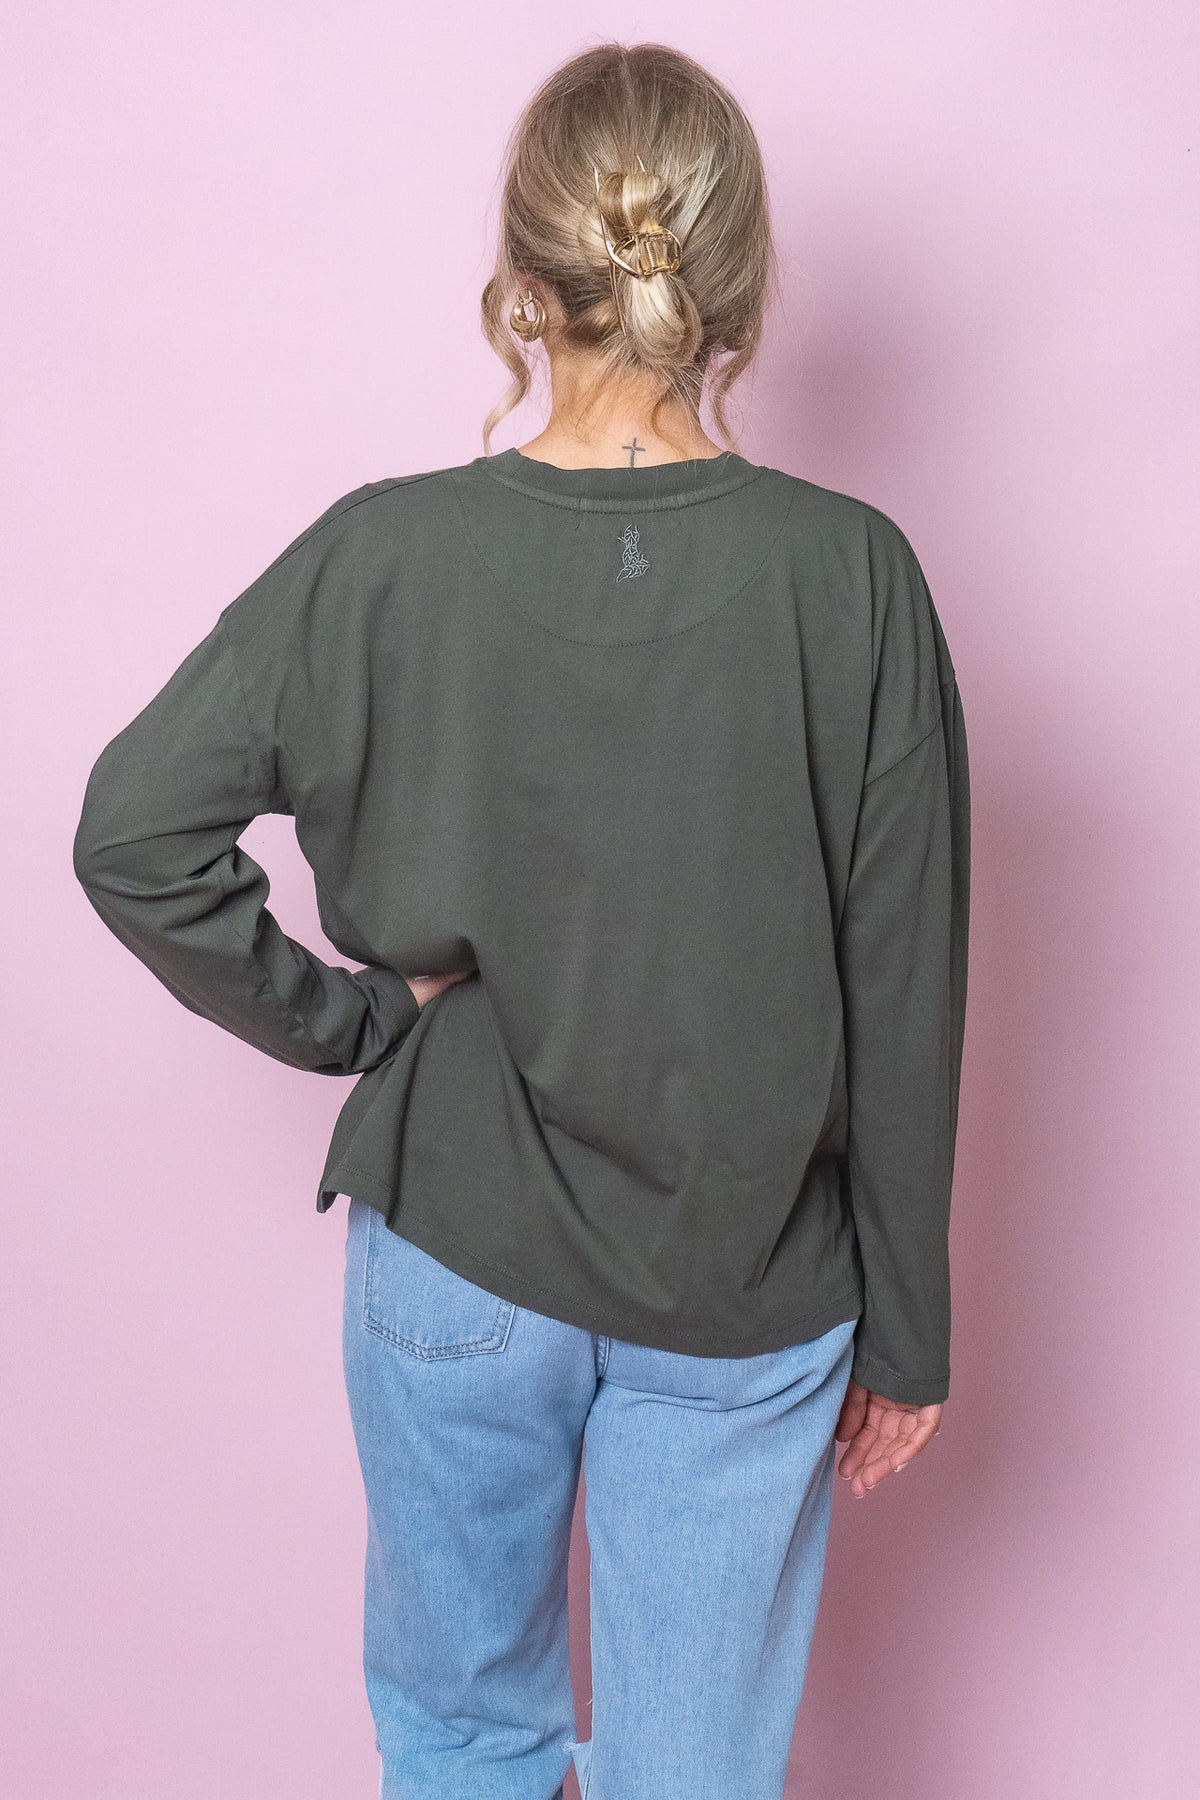 Hold Up Long Sleeve Top in Thyme - Foxwood